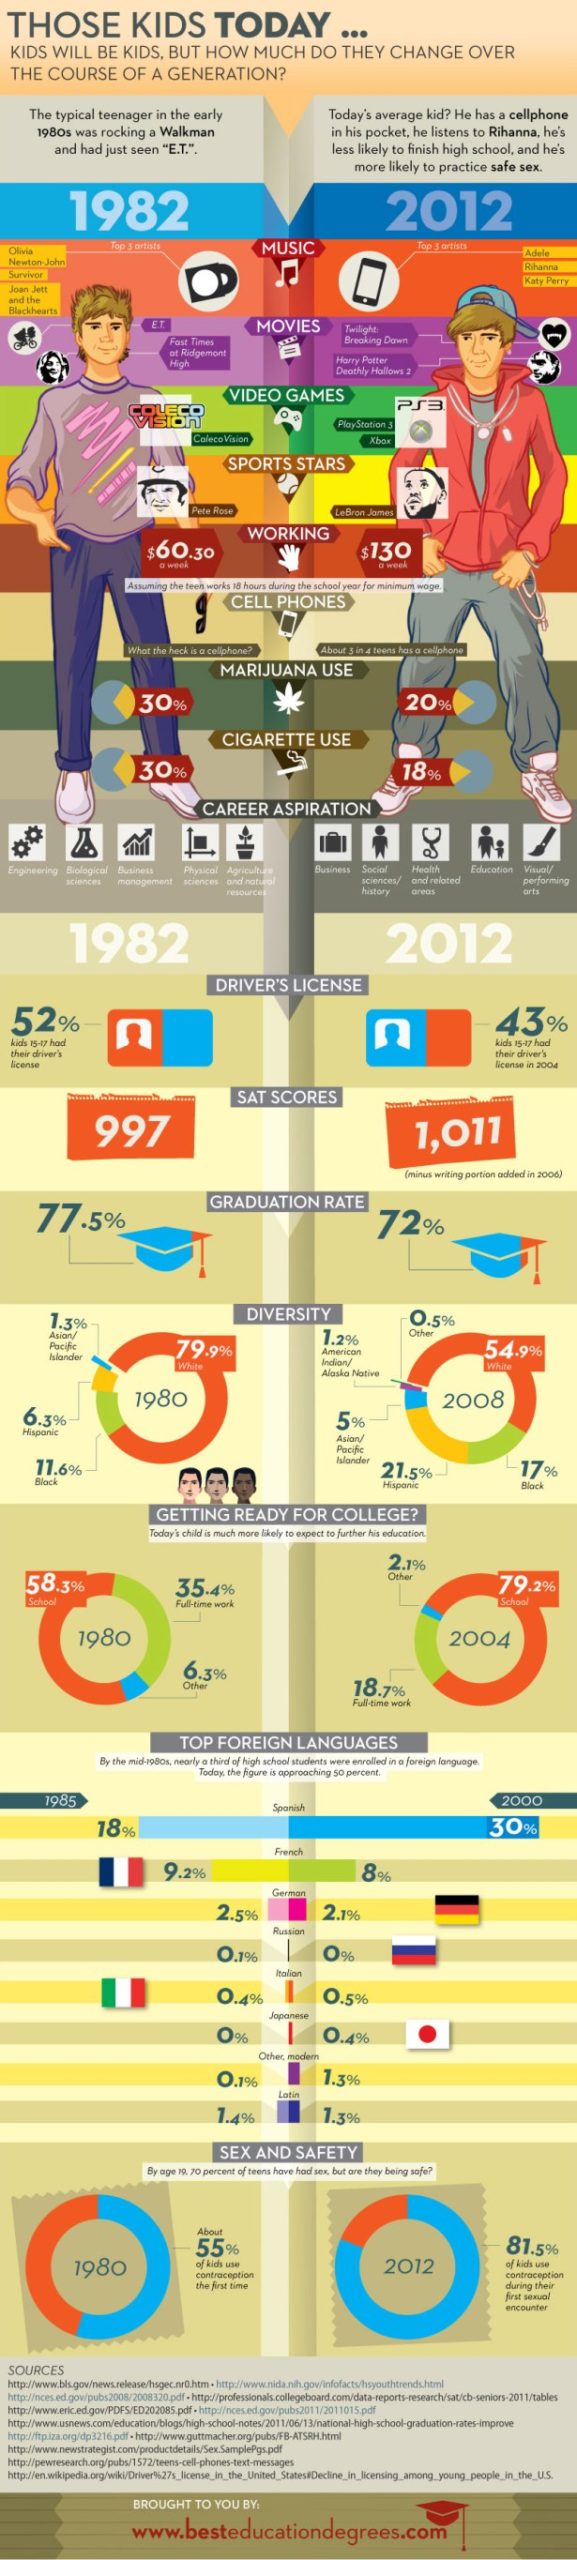 How Kids Change Over the Course of a Generation 1982 to 2012 [Infographic]